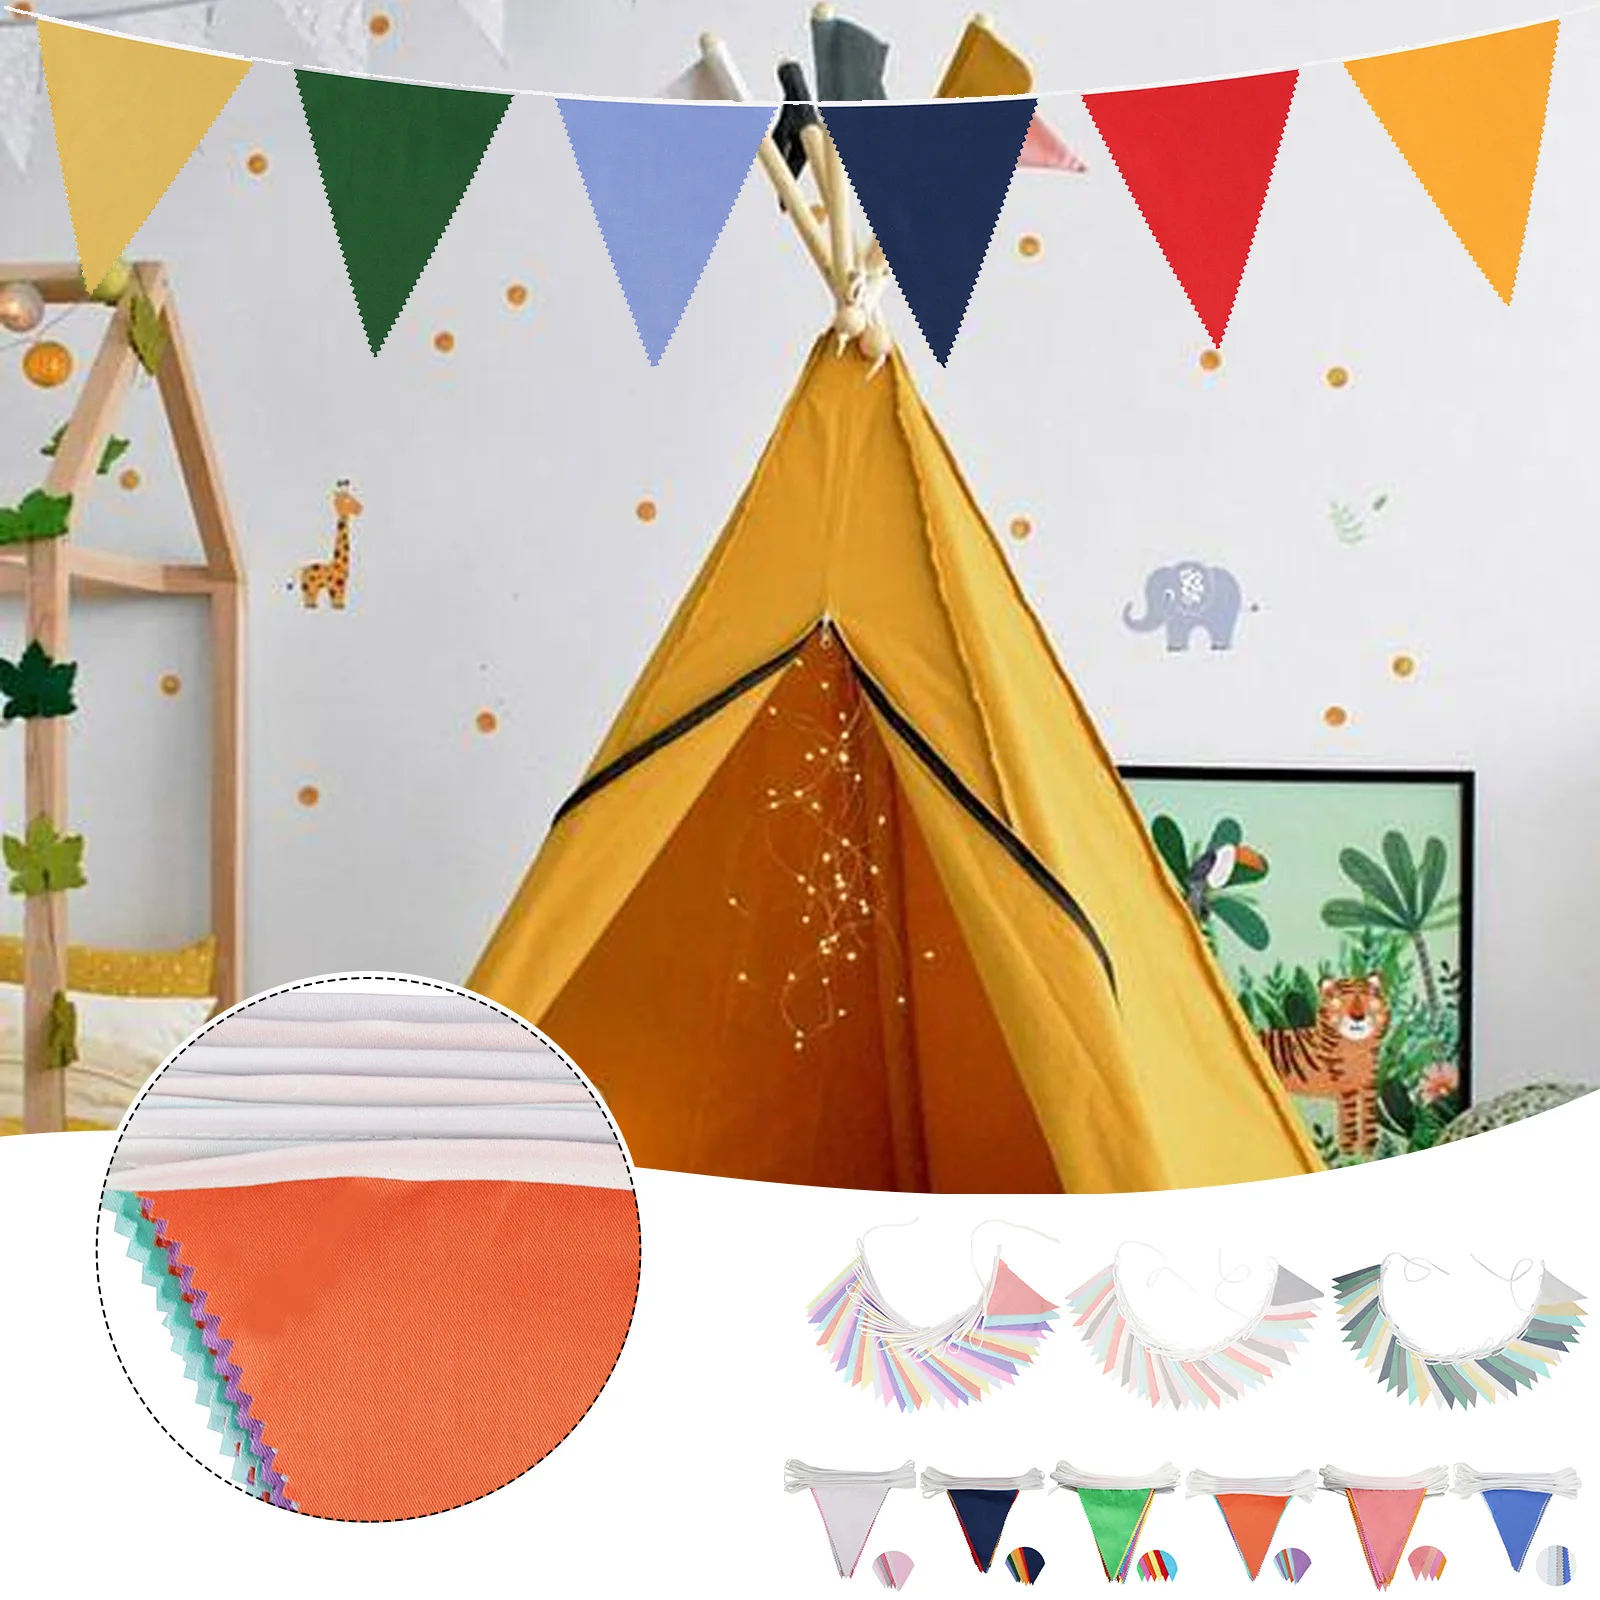 

10M/36 Flags Multicolor Bunting Banners Wedding Birthday Baby Shower Party Decoration Colored Garland Flags Colorful Pennant